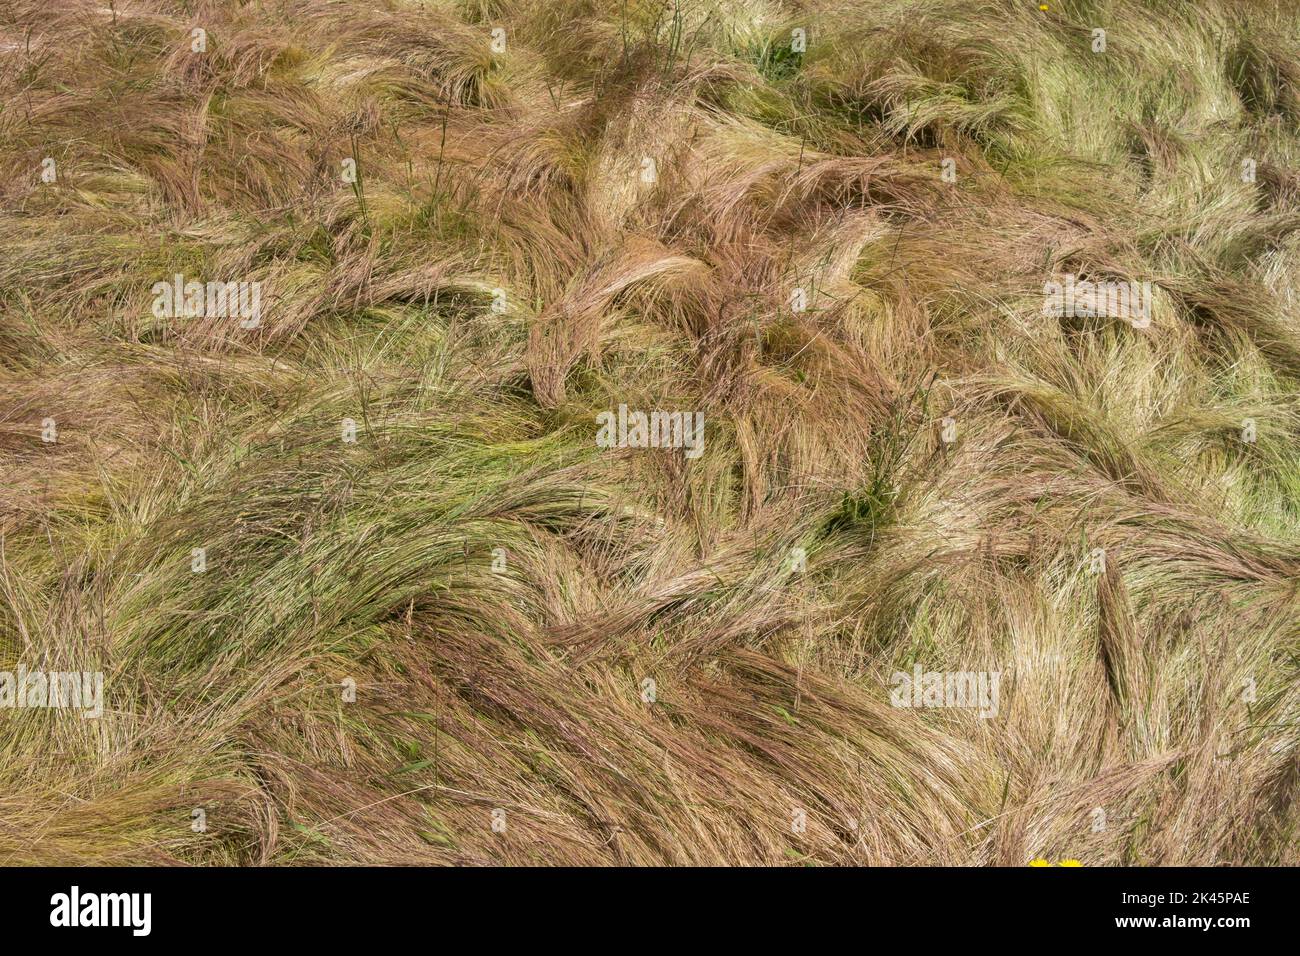 Field of windswept, wild grasses in summer, close up of long grass, overhead view. Stock Photo